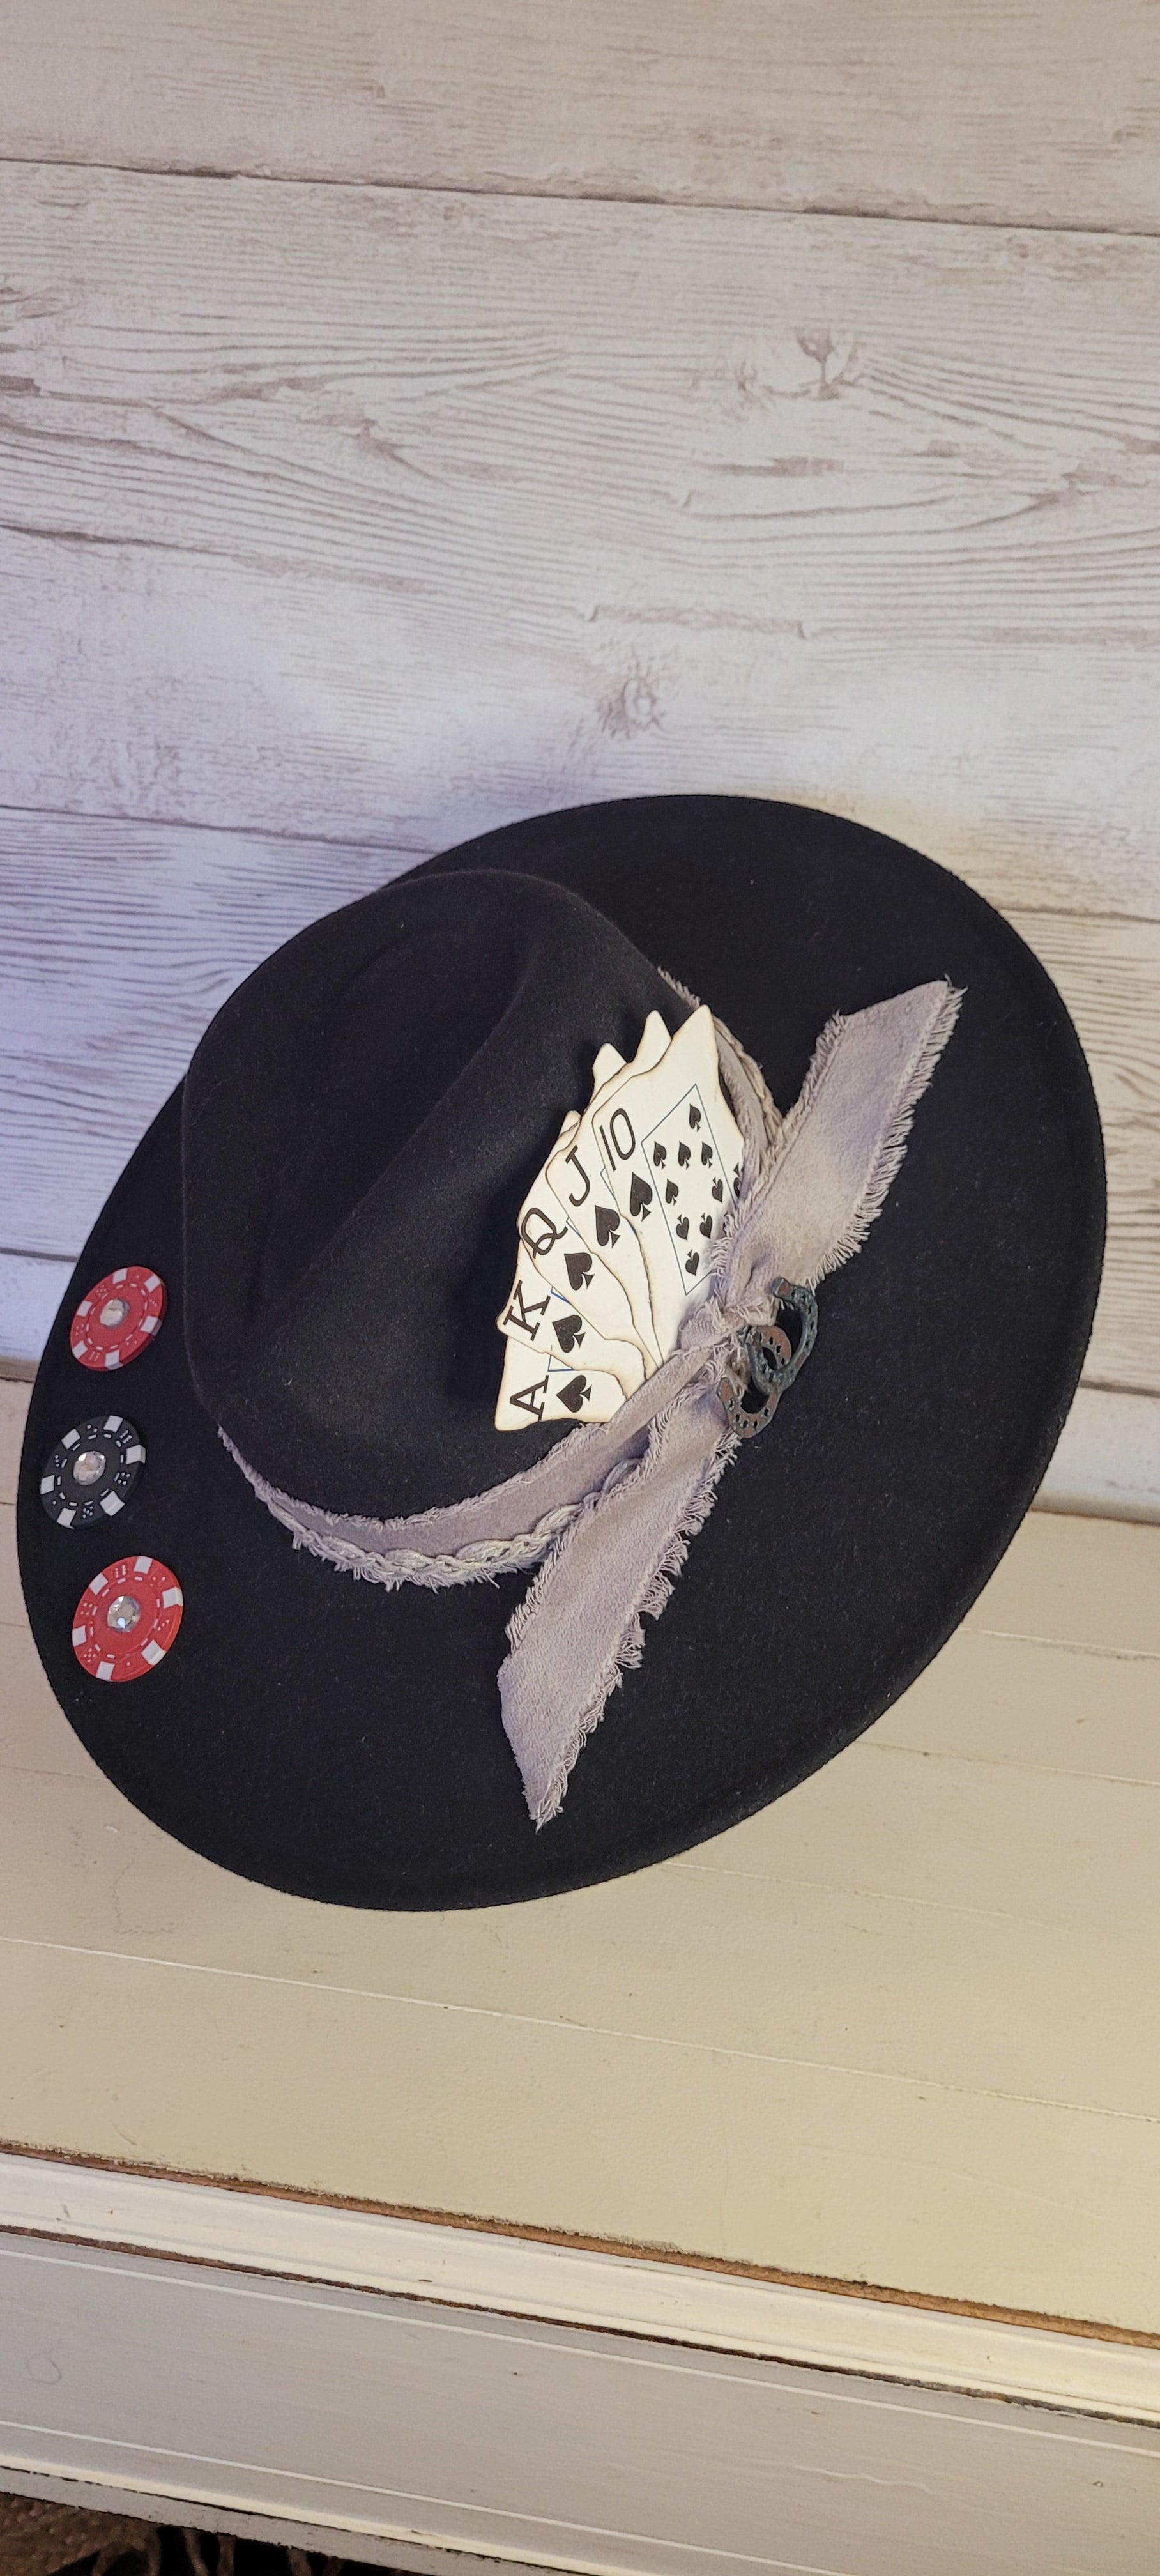 Features poker chips, dice, rhinestones, playing cards, natural frayed & lace ribbon, & metal horseshoe Felt hat Flat brim 35% cotton and 65% polyester Ribbon drawstring for hat size adjustment Head Circumference: 24" Crown Height: 5" Brim Length: 15.75" Brim Width: 14.5" Branded & numbered inside crown Custom designed by Kayla